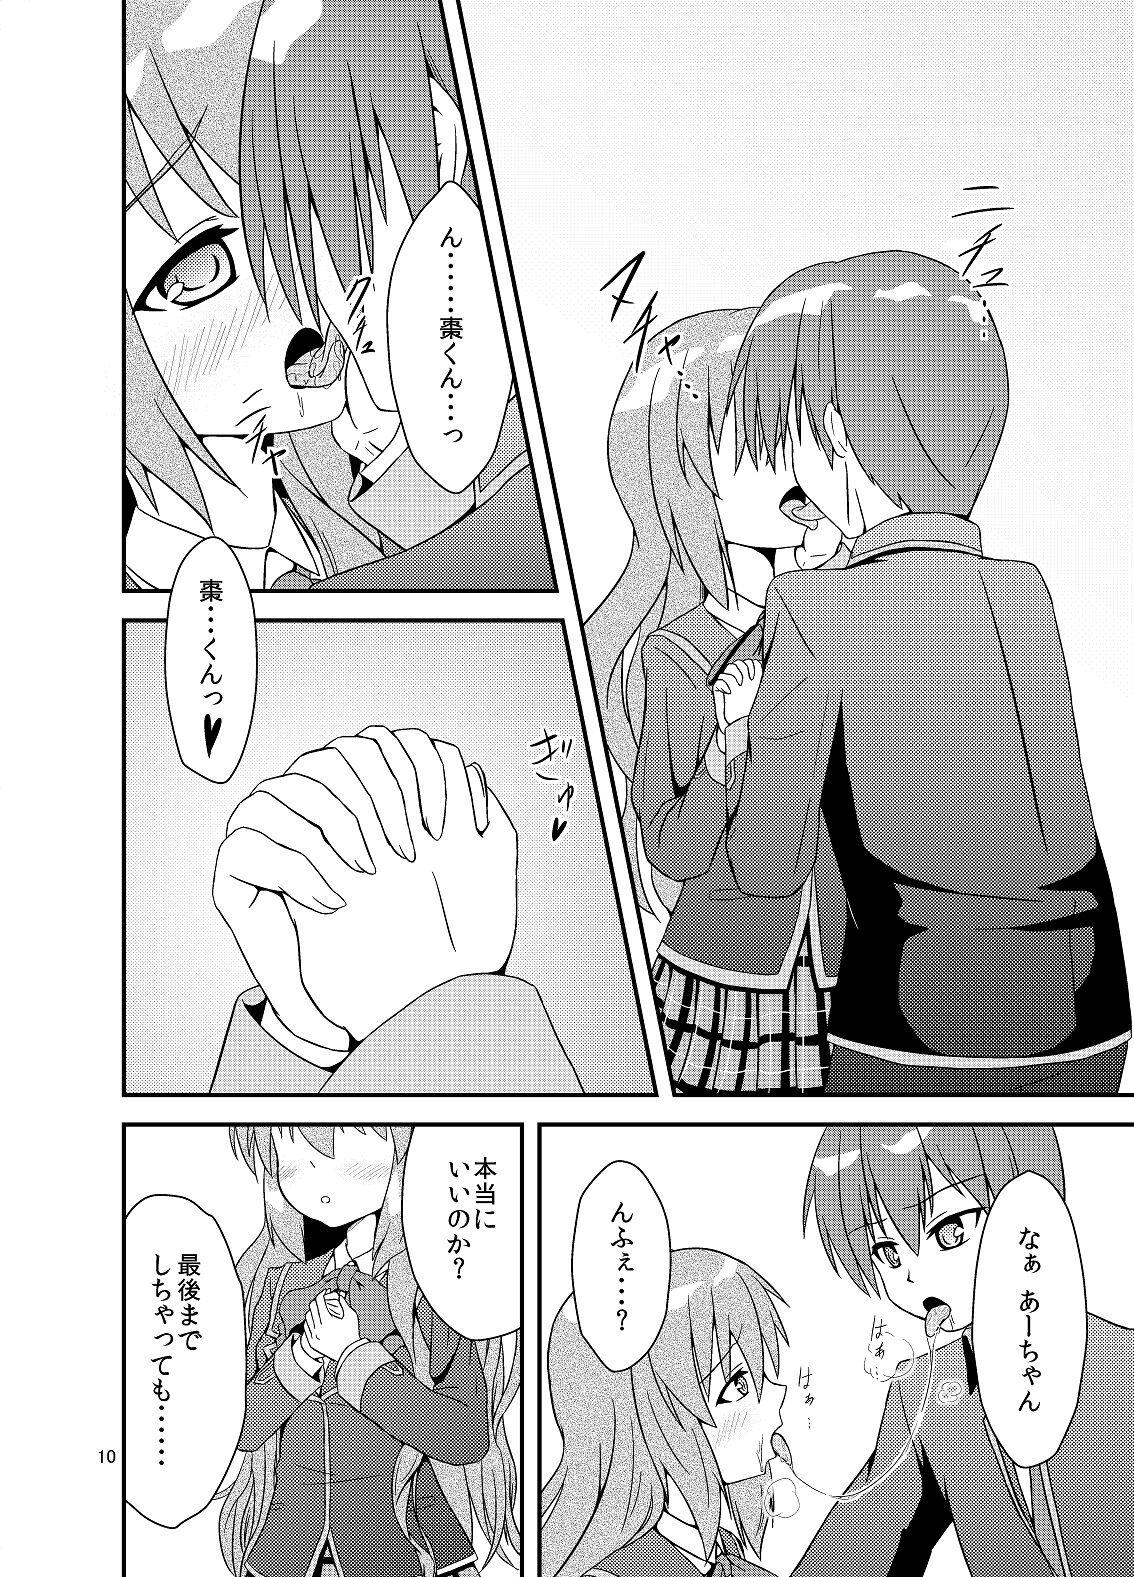 Amigos √A - Little busters Fucked - Page 5